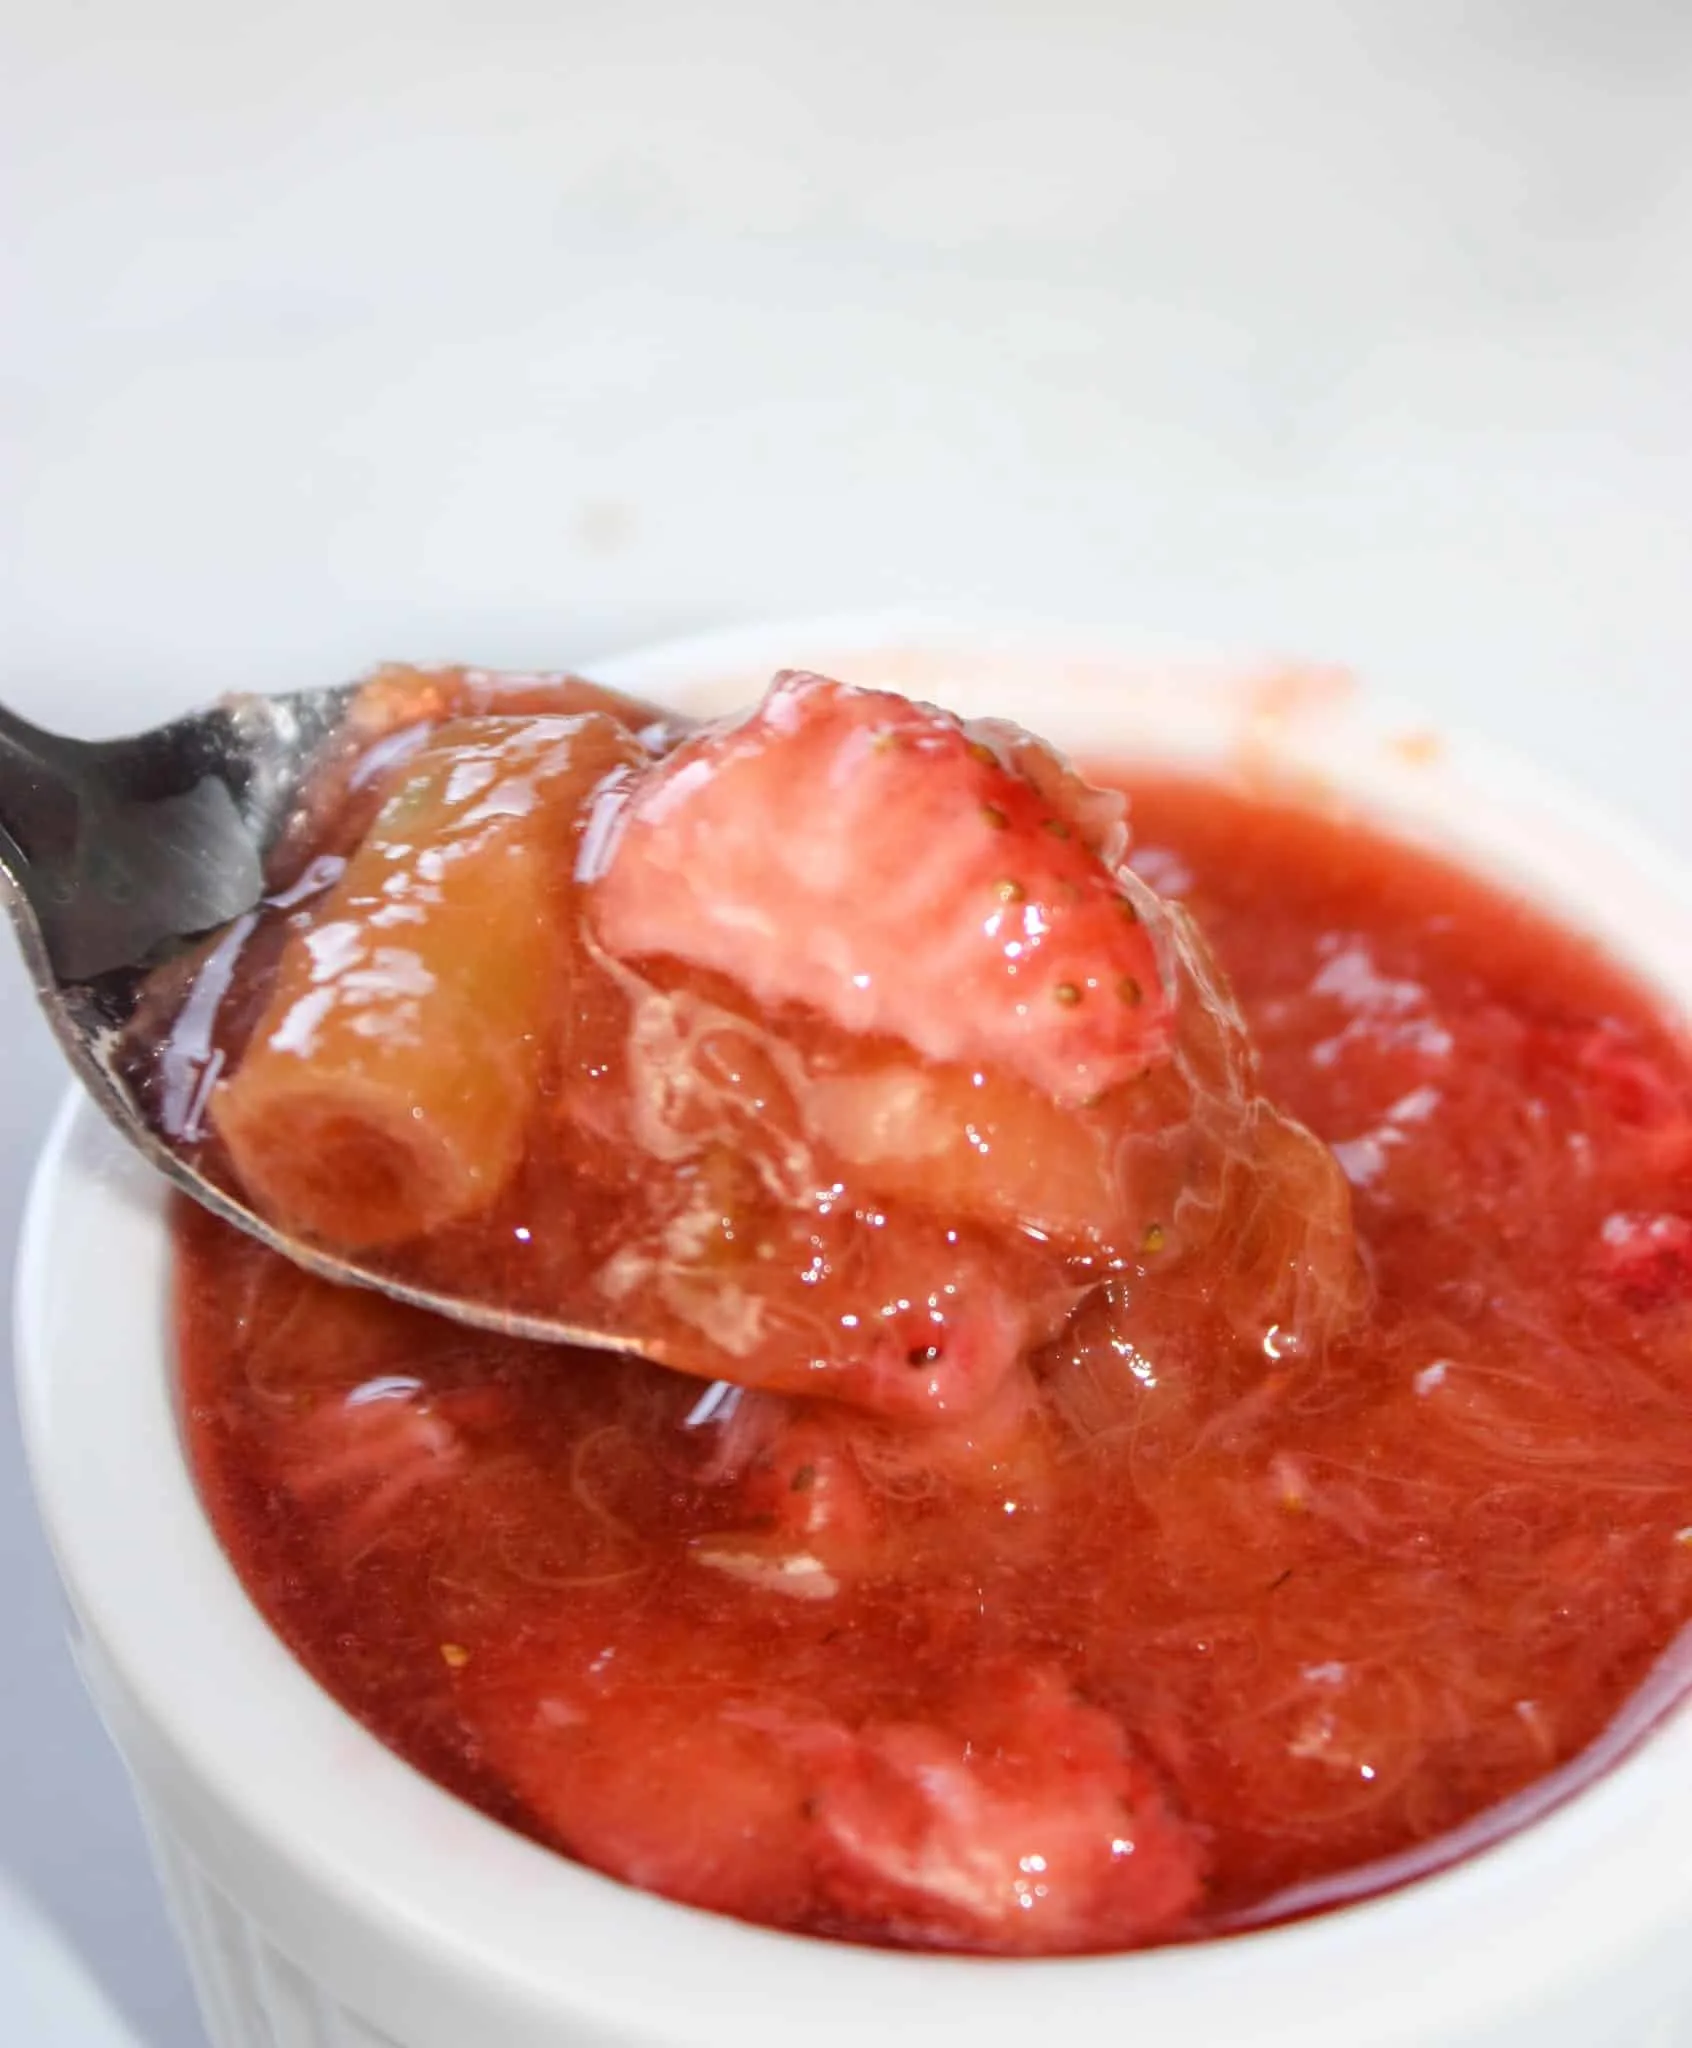 Eat Strawberry Rhubarb Sauce on its own.